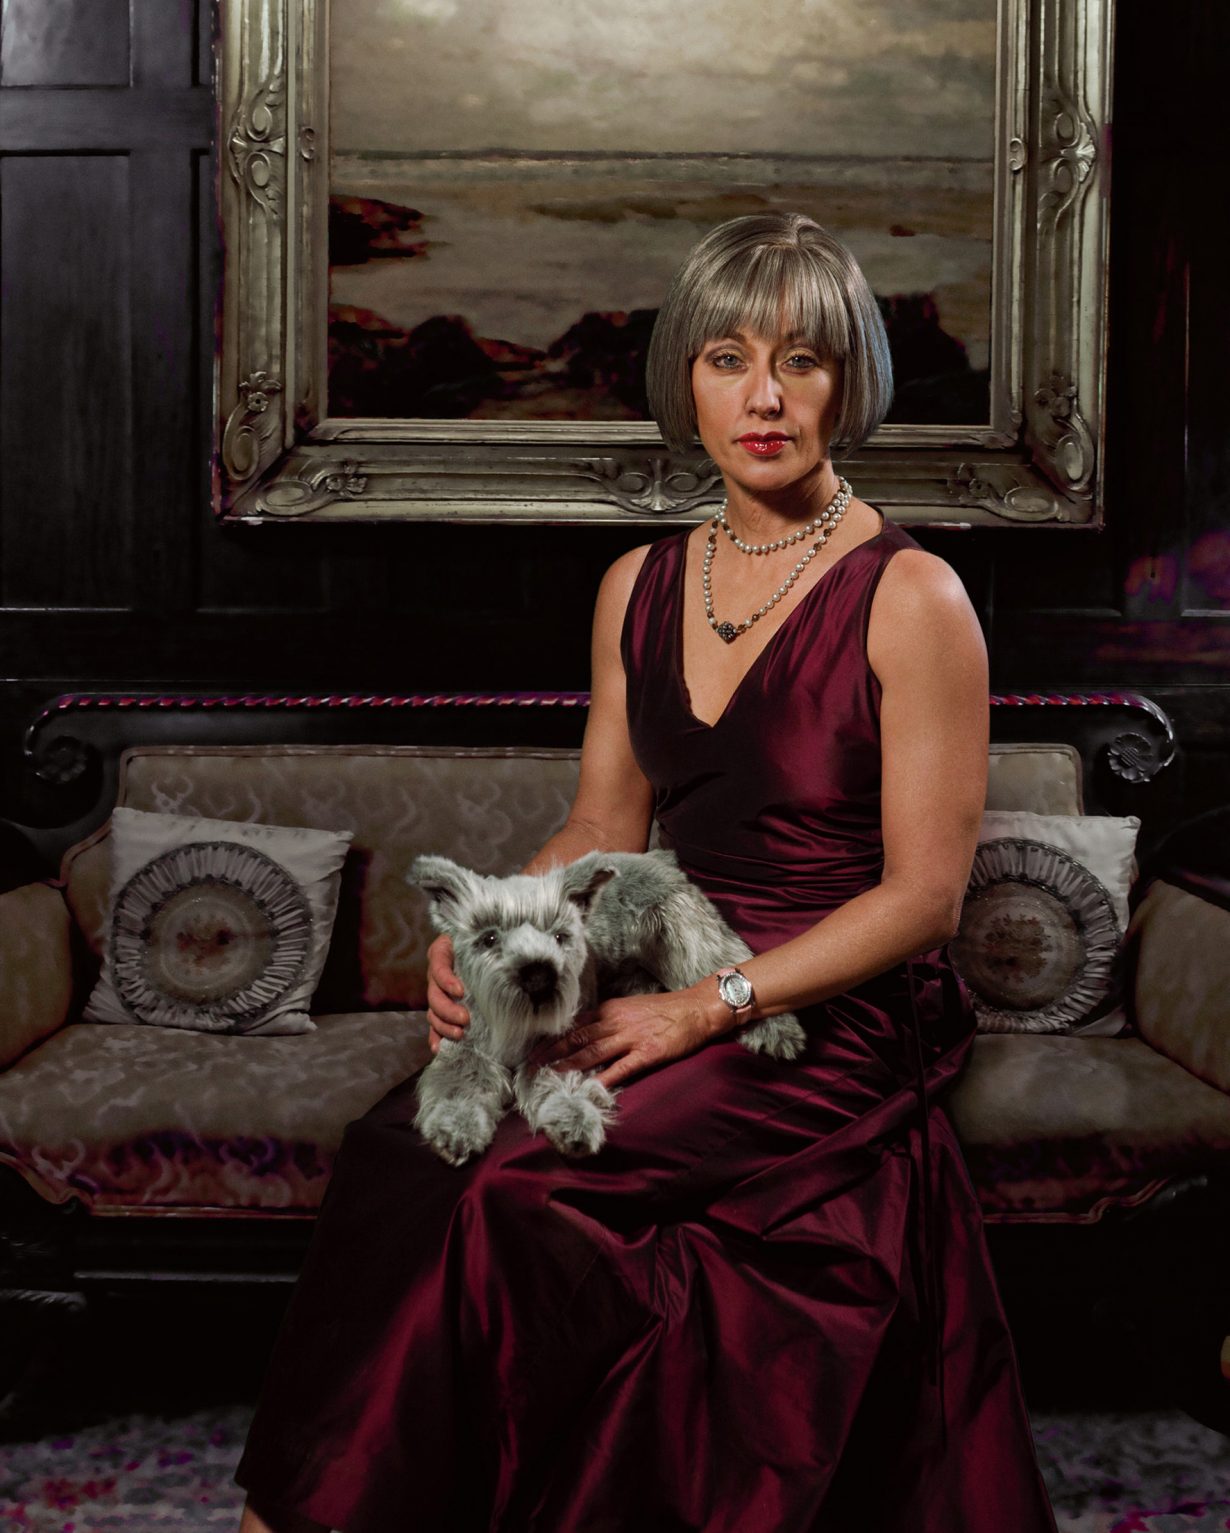 Cindy Sherman: 'This is how I look, I guess